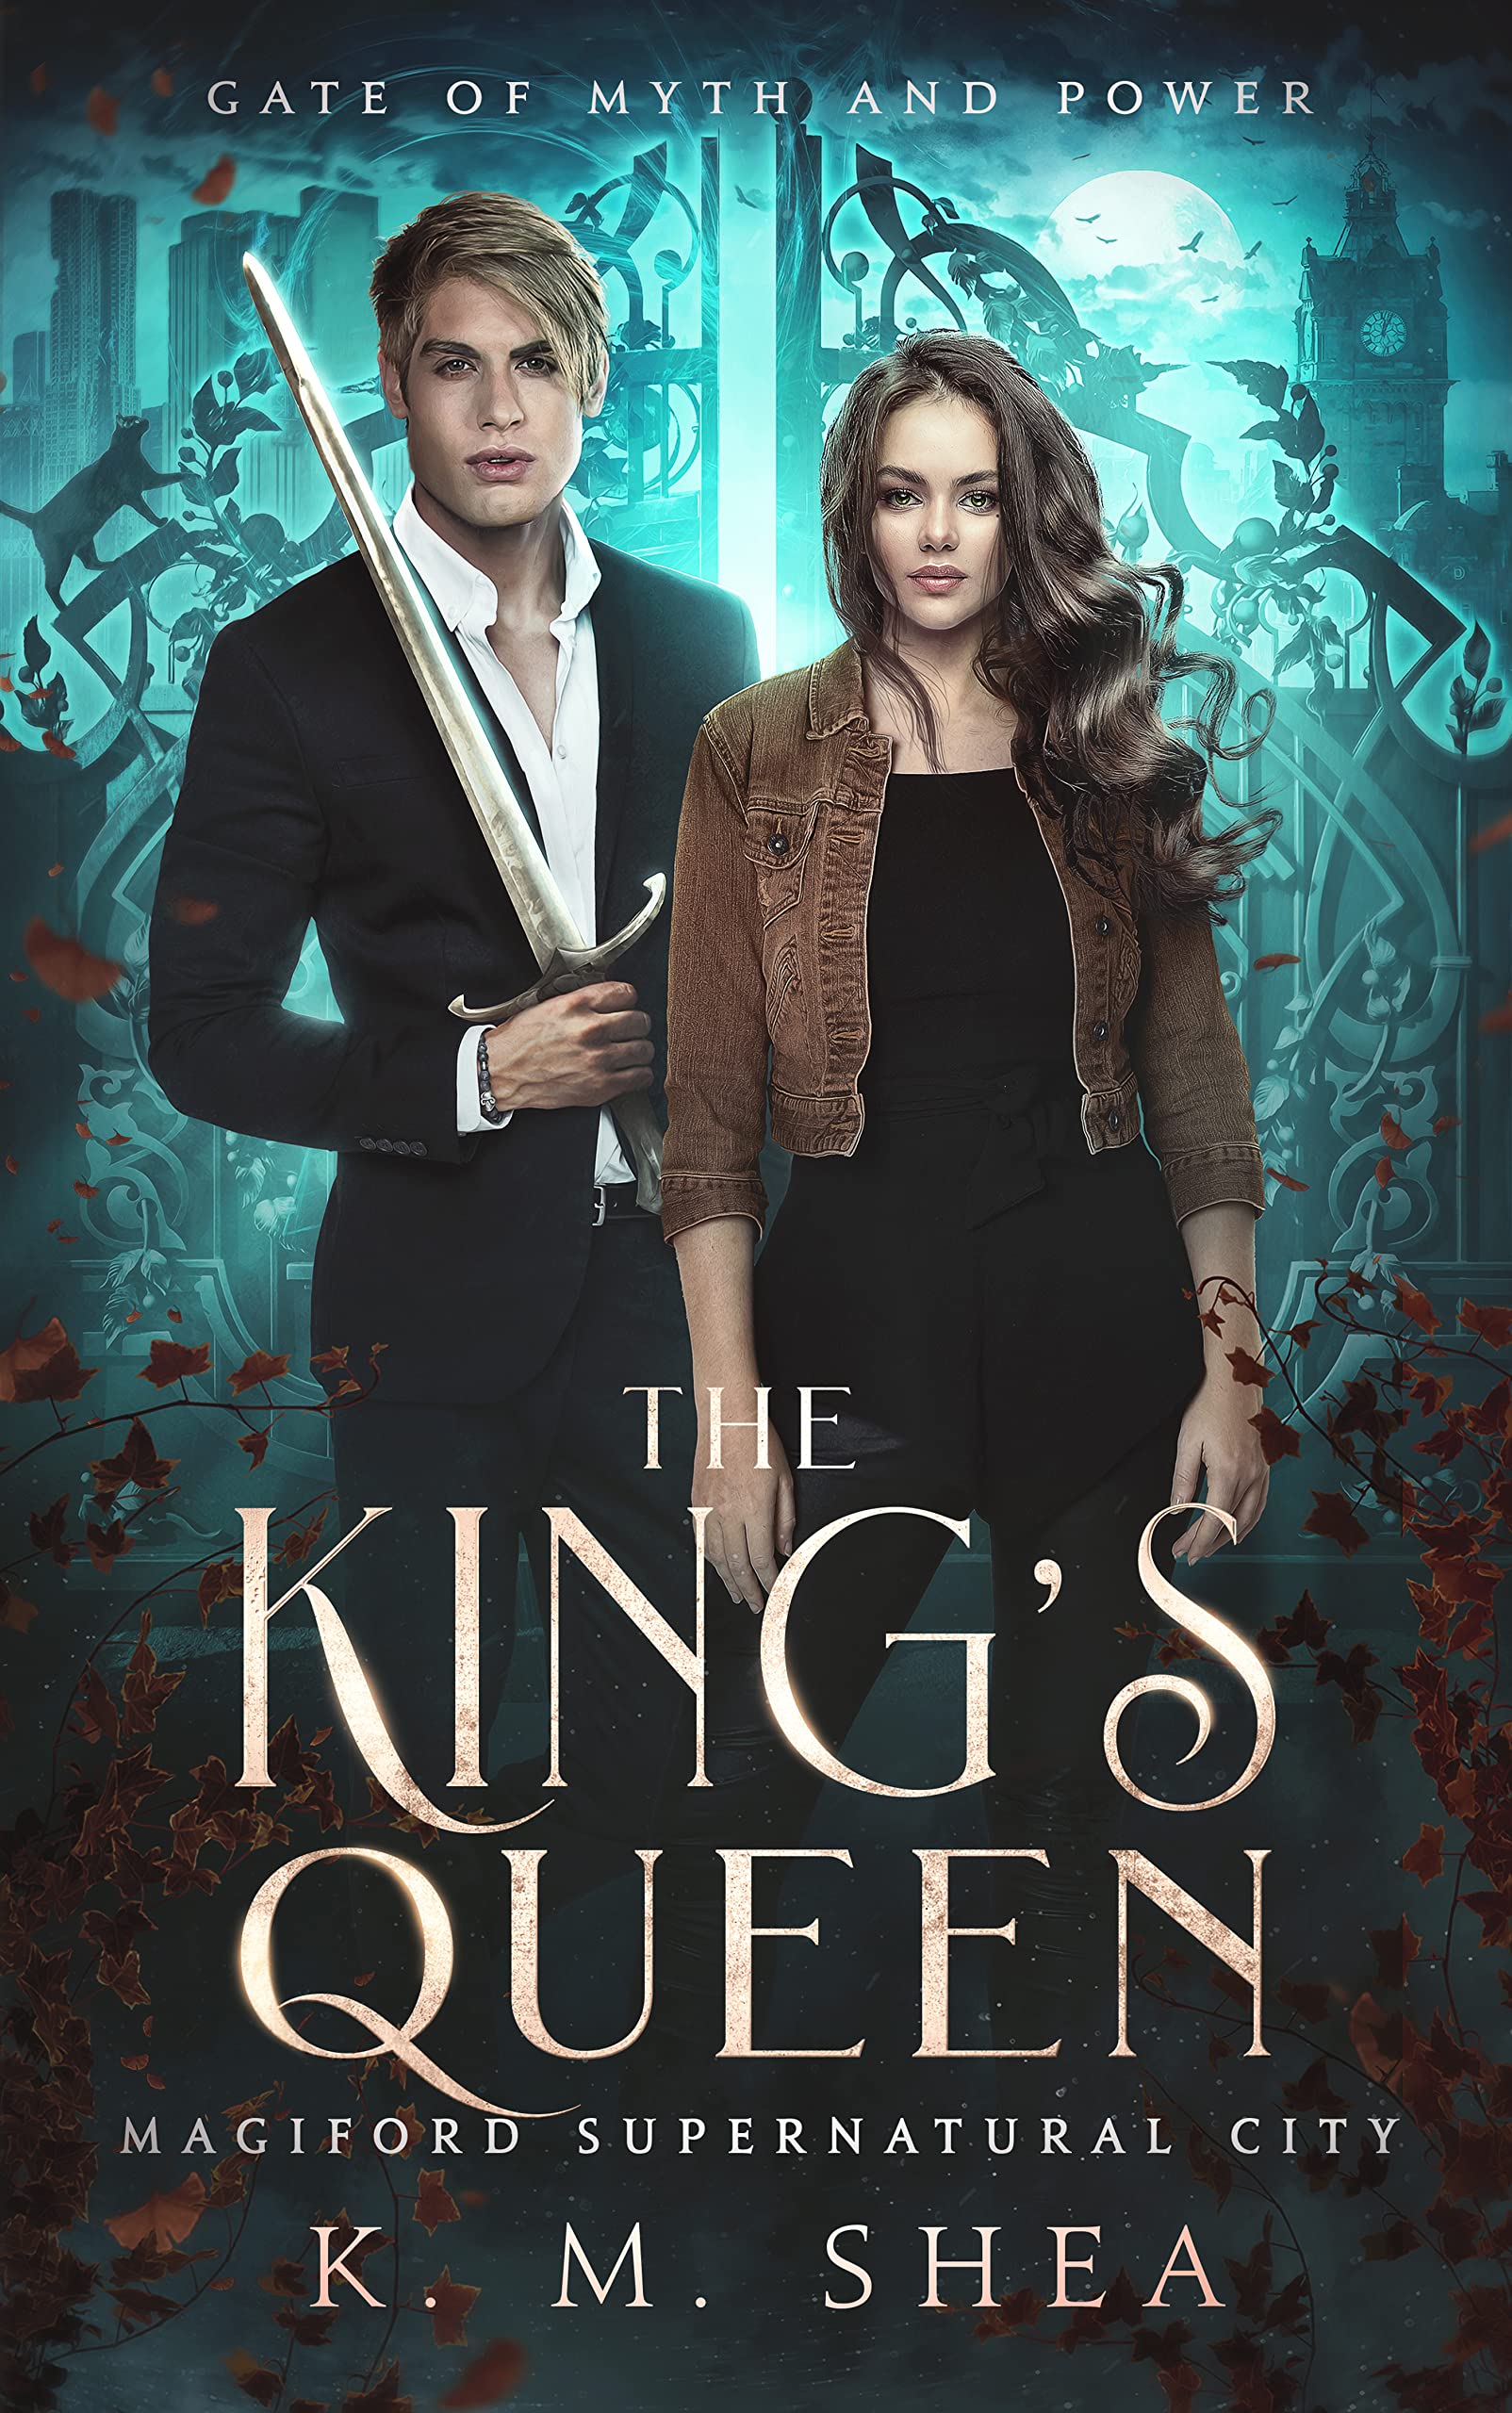 The kings queen  by K.M.Shea